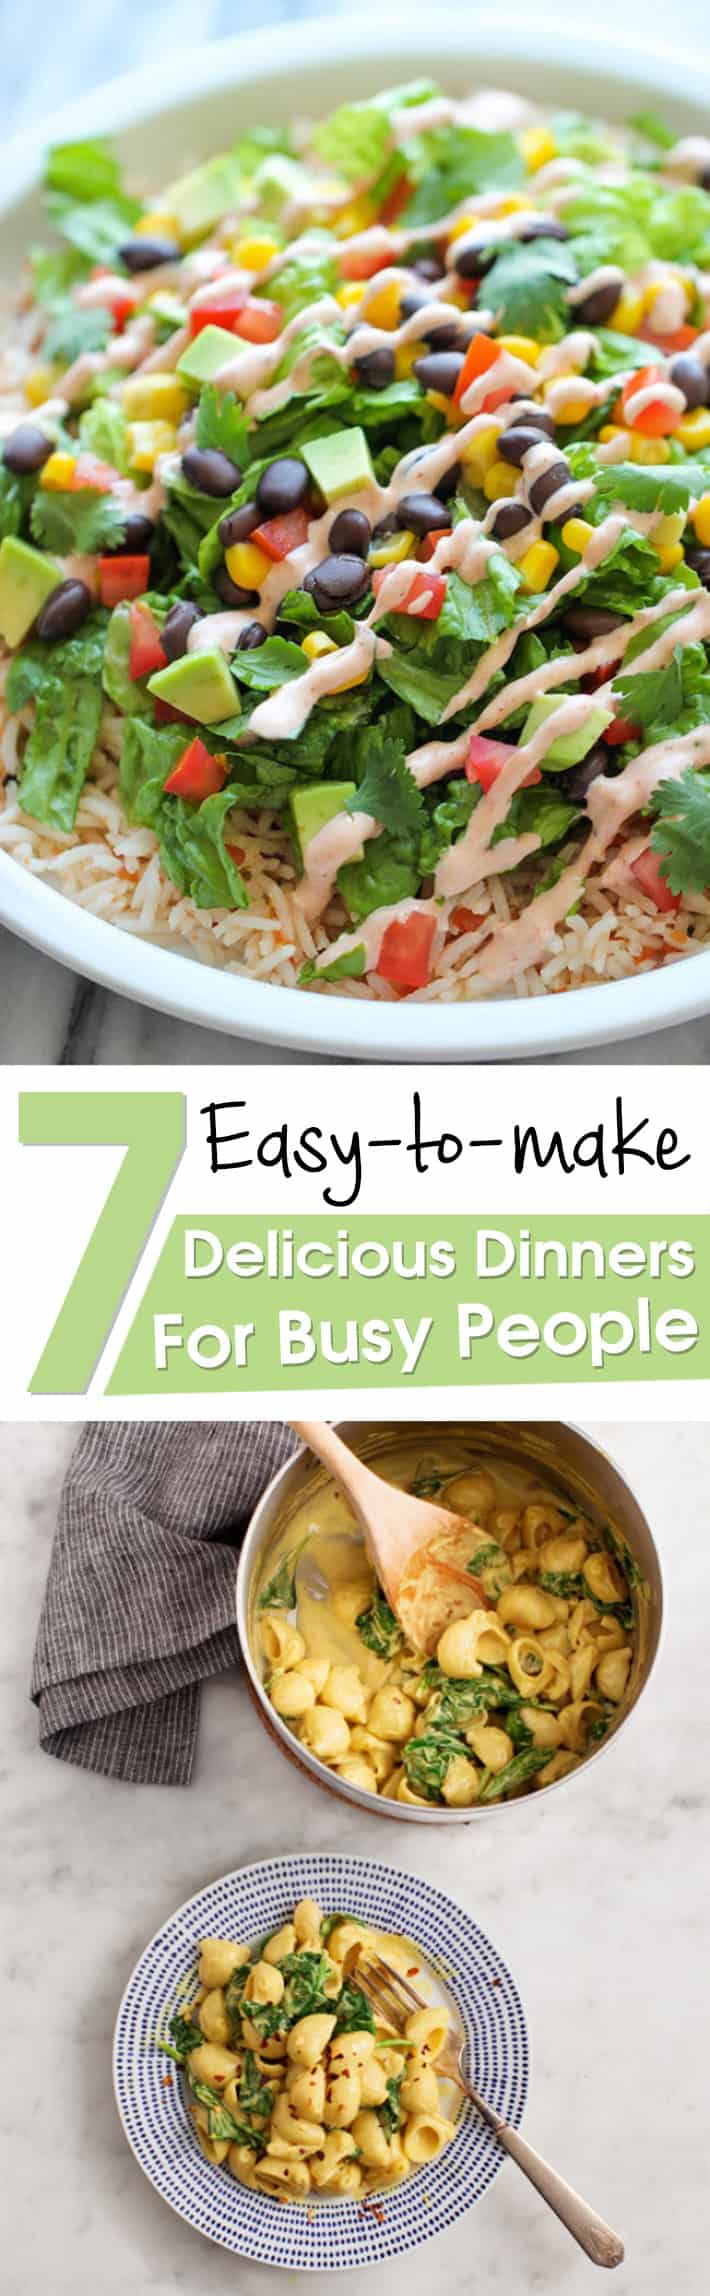 7 Delicious Easy-to-make Dinners For Busy People.